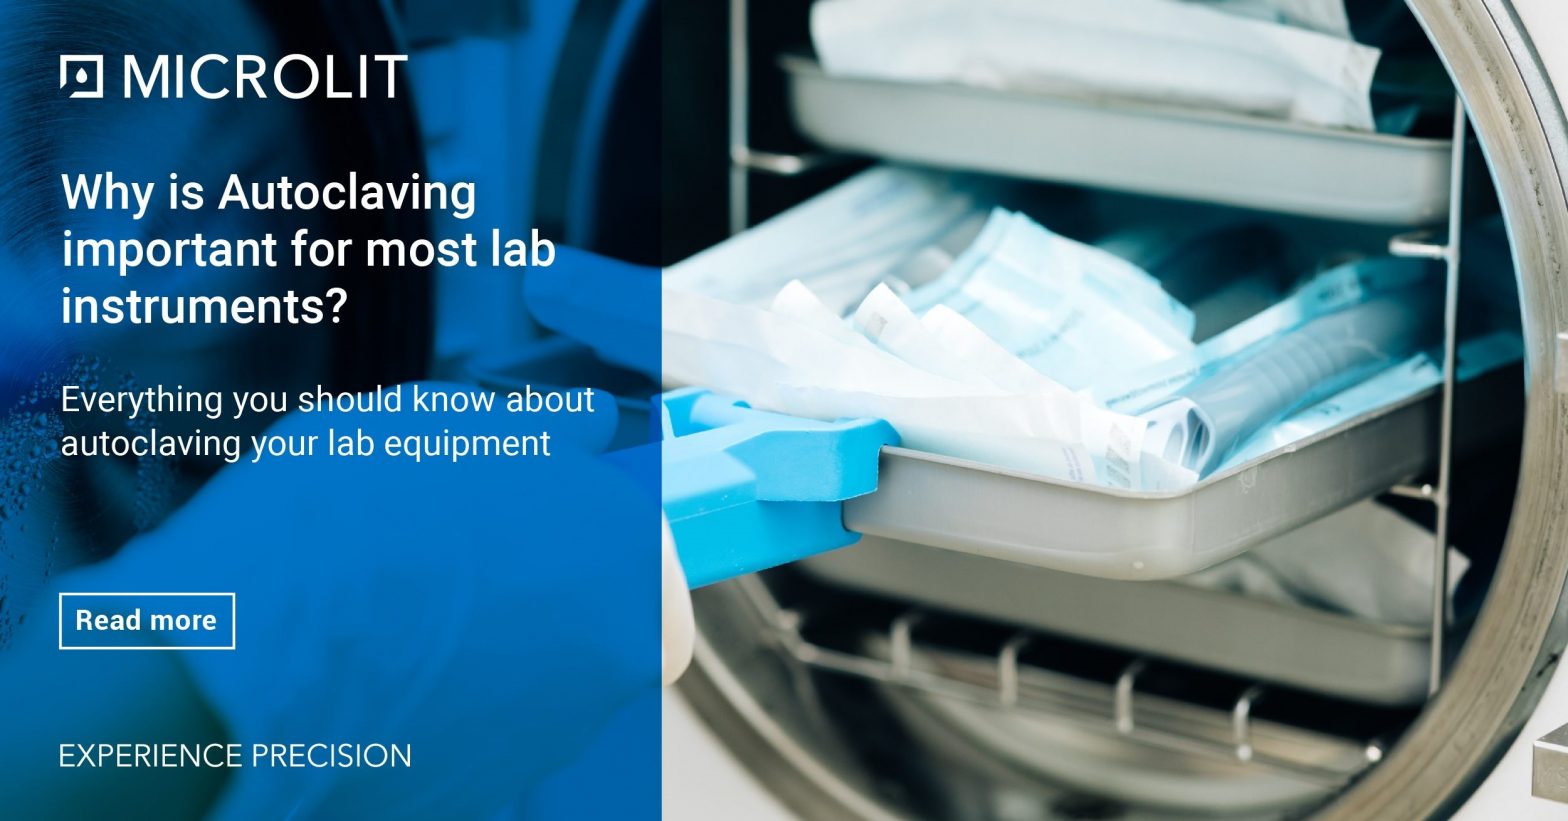 why is Autoclaving important for most lab instruments